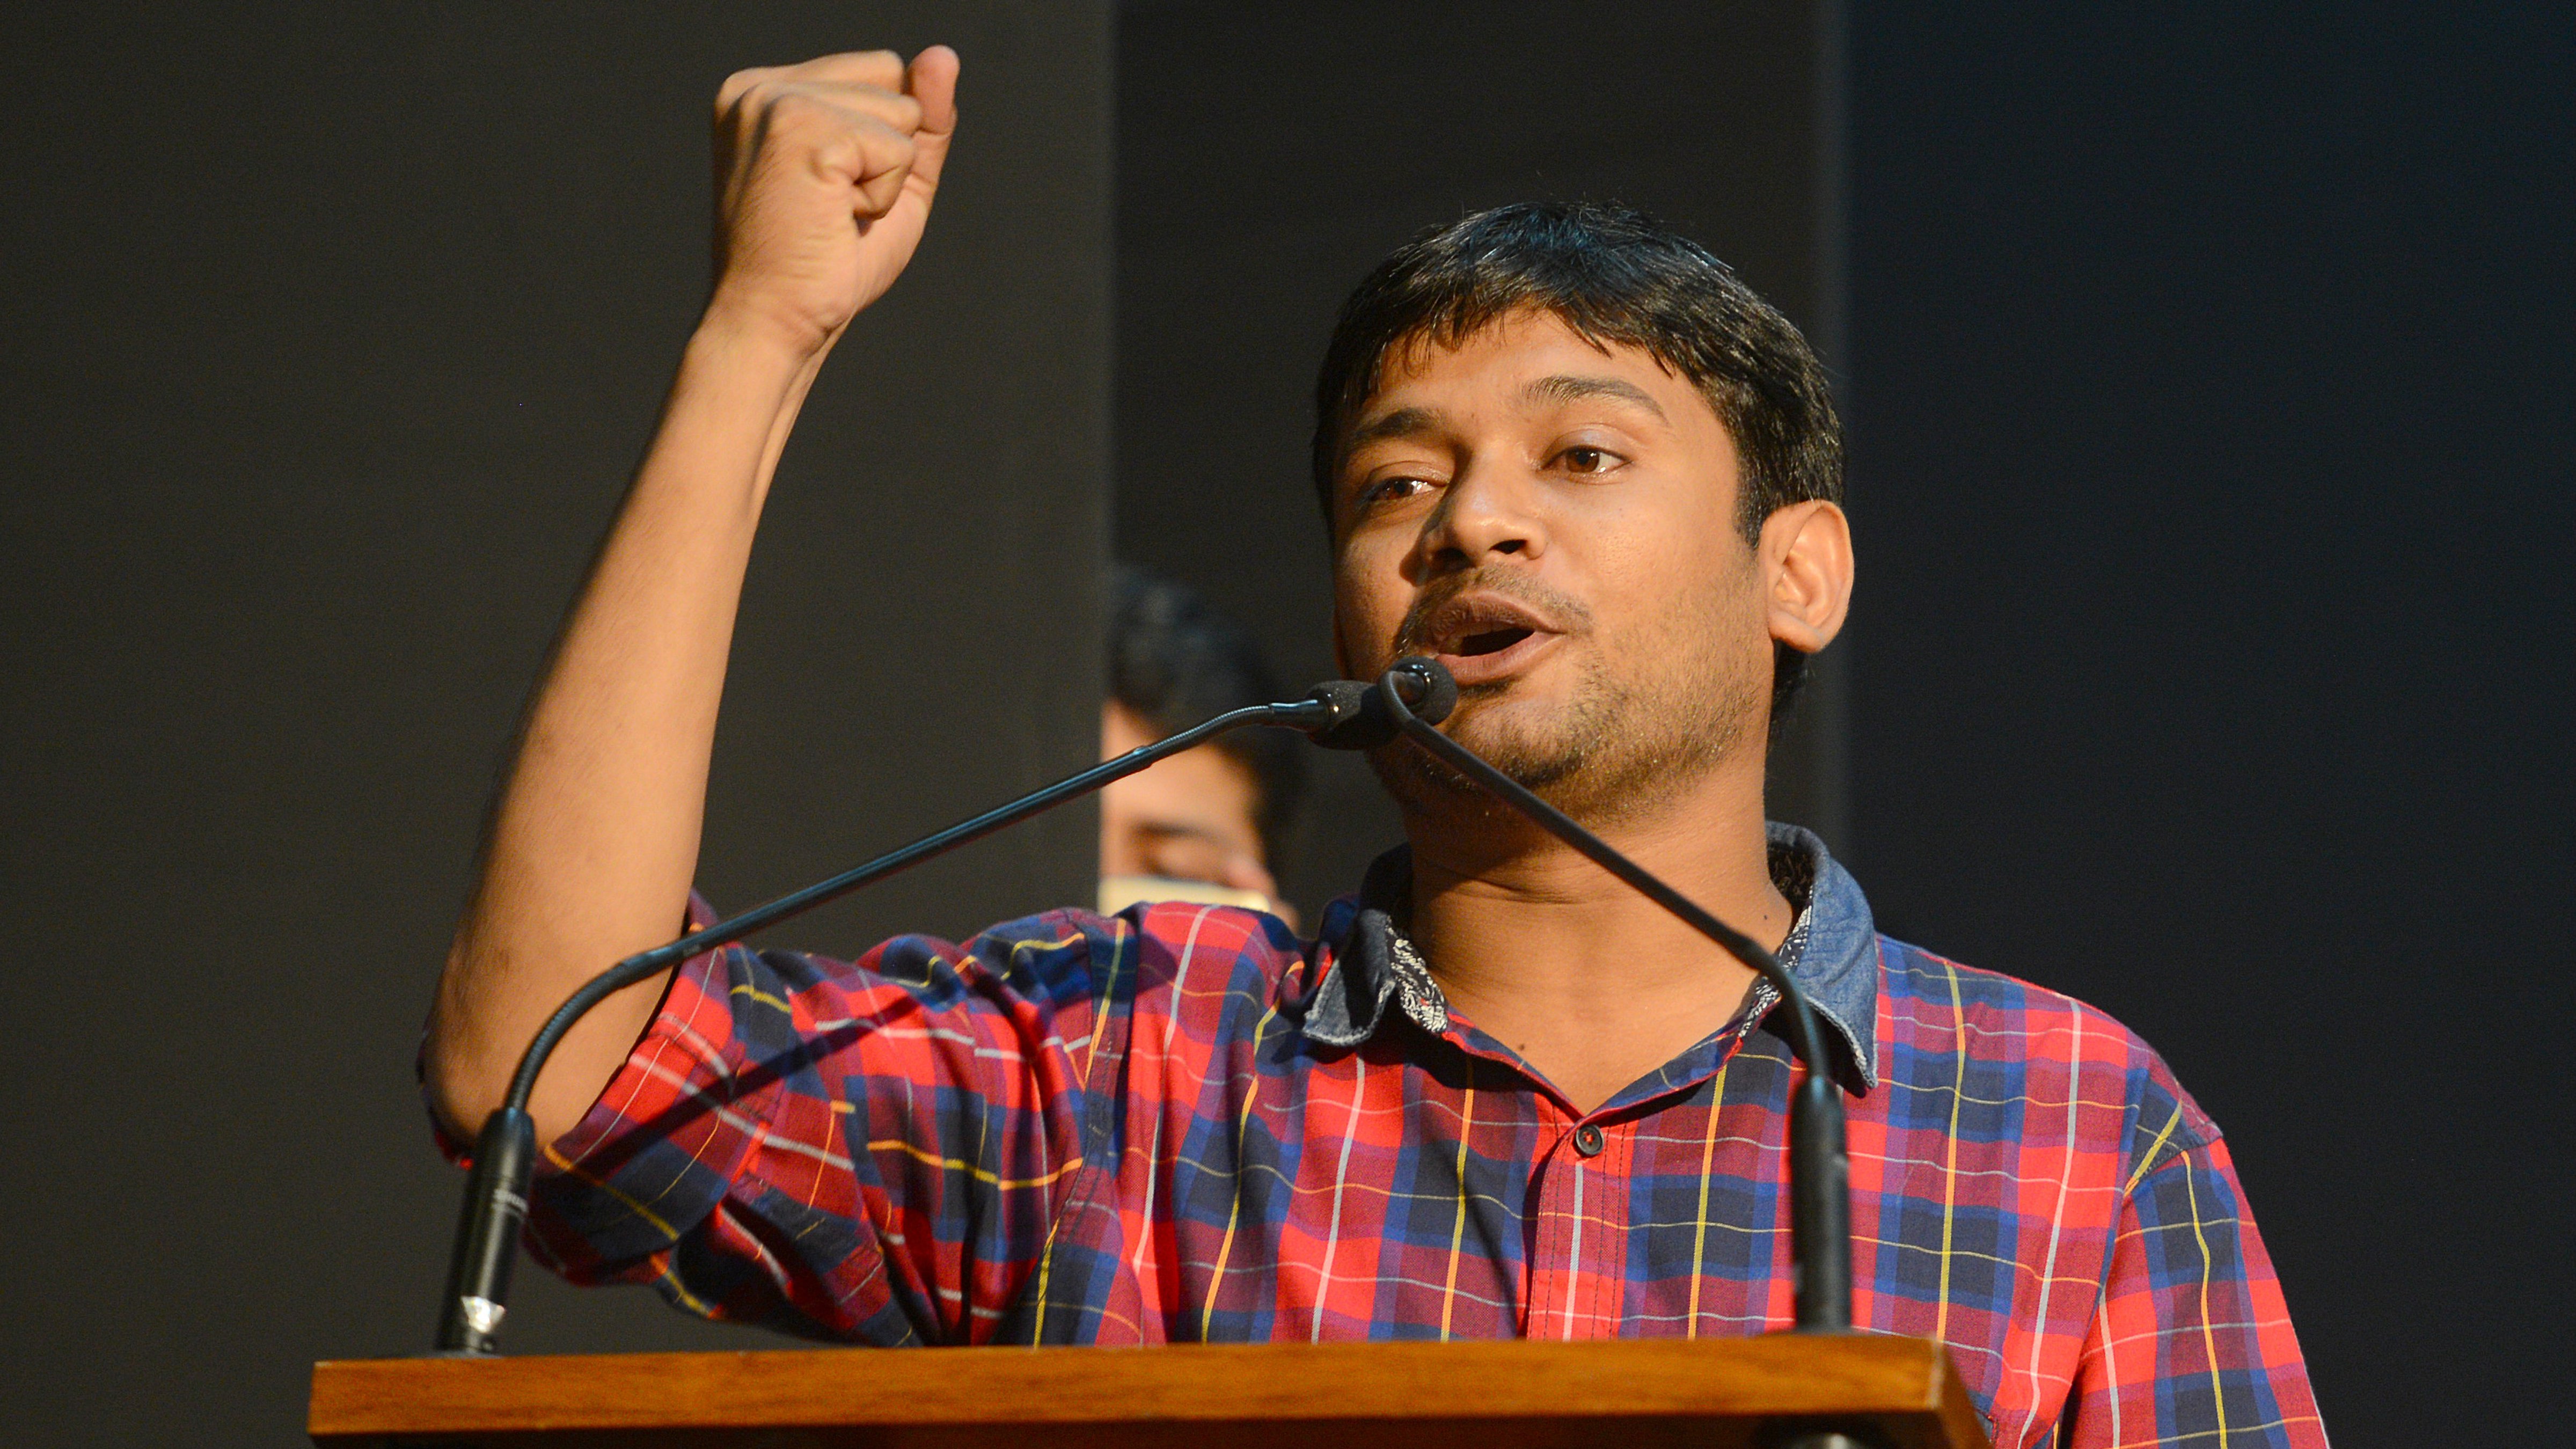 Kanhaiya Kumar is among the 10 suspects accused of chanting slogans against Indian rule in Kashmir at a JNU event, or of facilitating the event, held in February 2016 to mark the death anniversary of Afzal Guru.